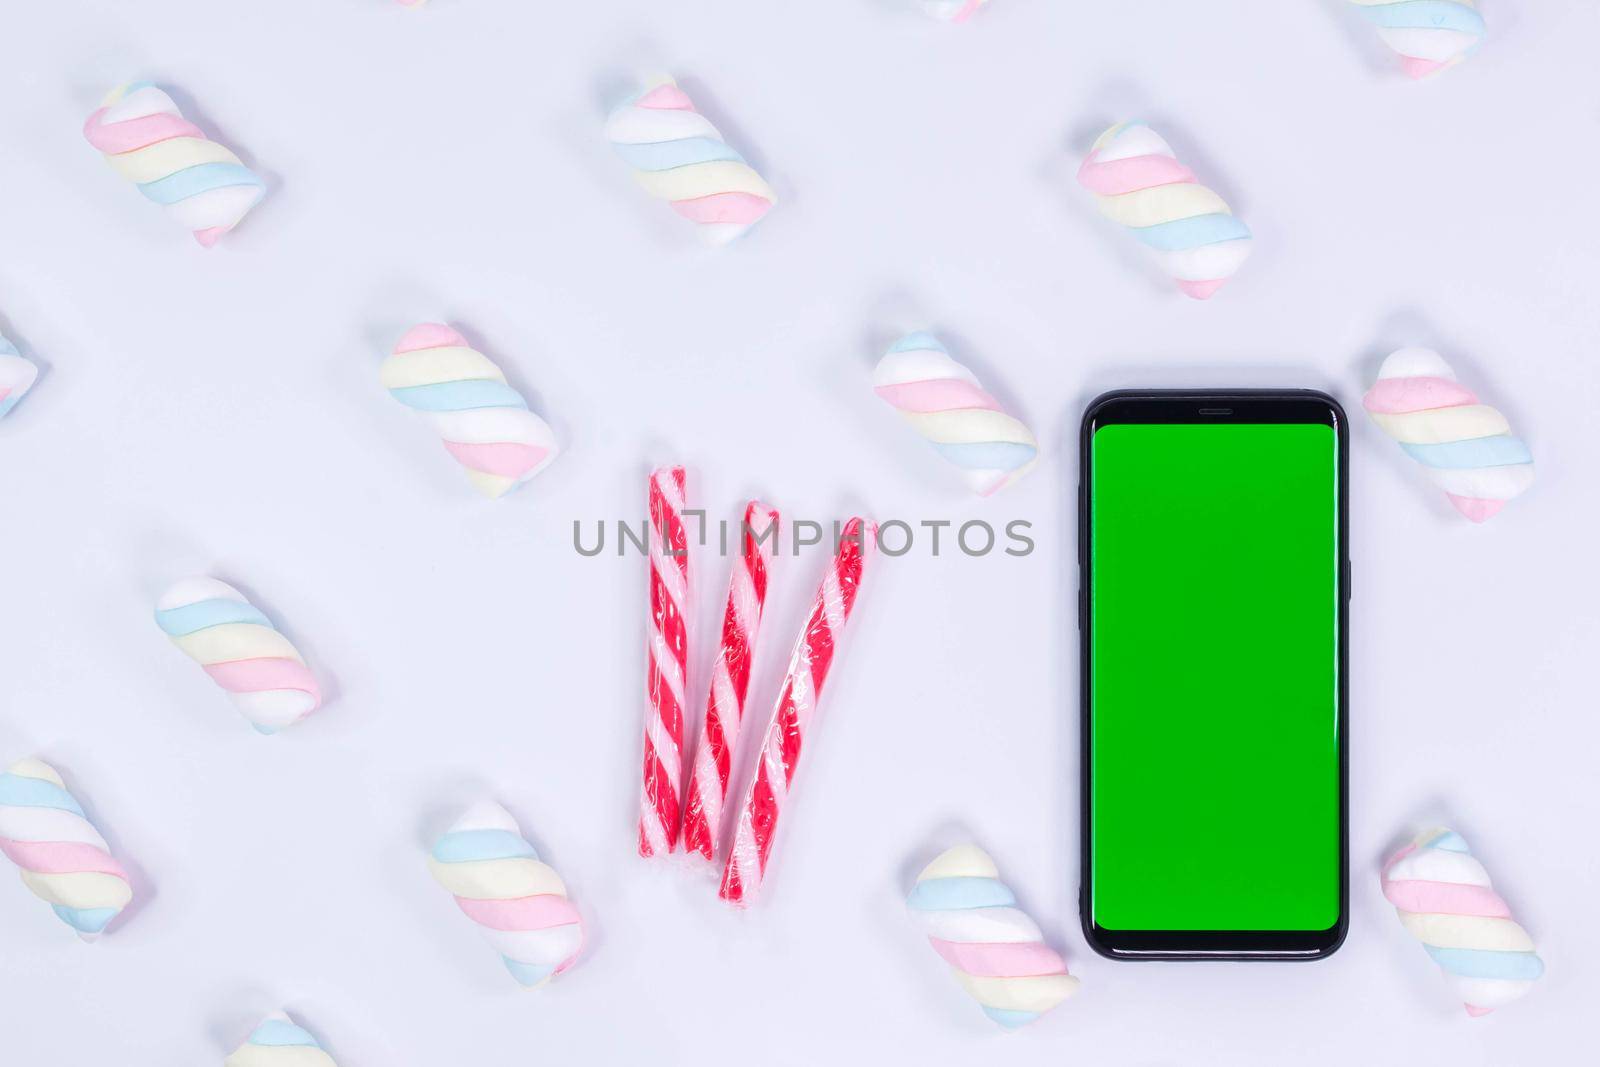 Phone mobile telephone with a vertical green screen. White background with twisted marshmallow pattern. Chroma key smartphone technology.